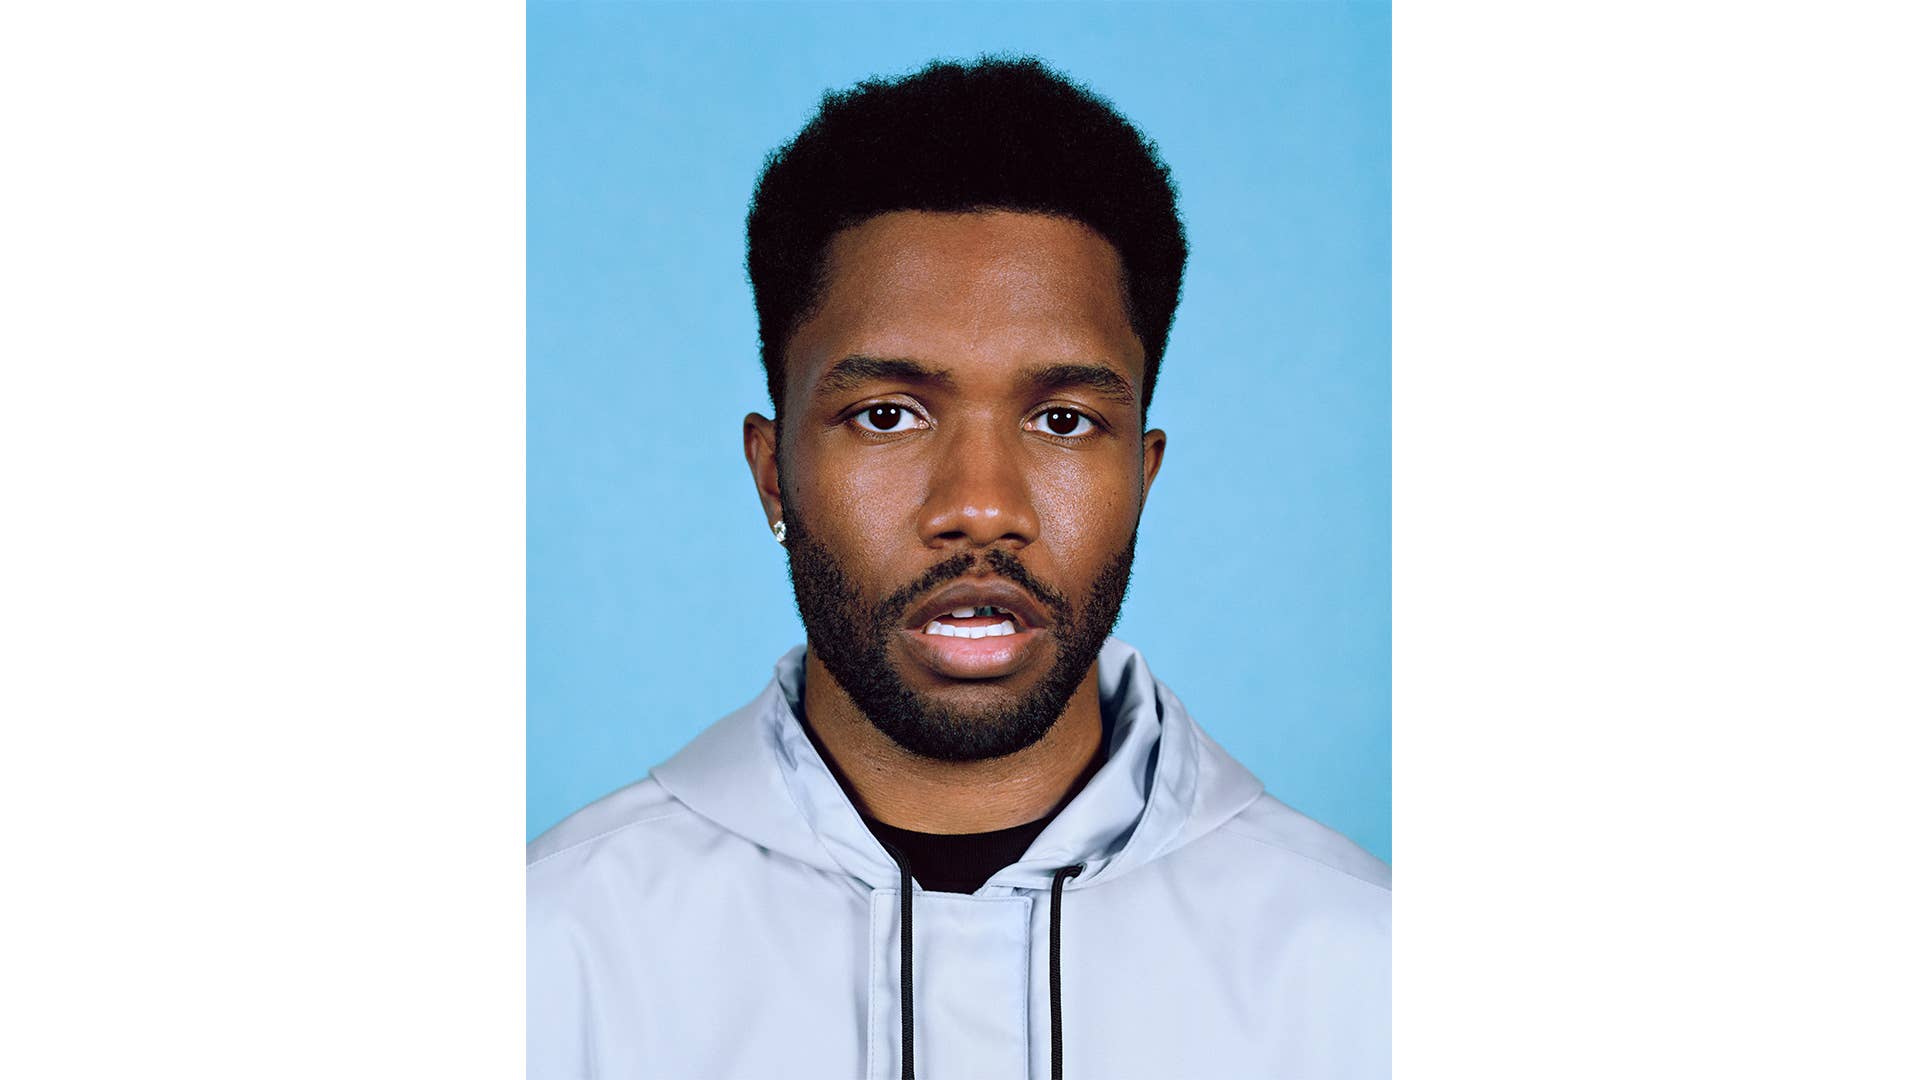 This is a photo of Frank Ocean.